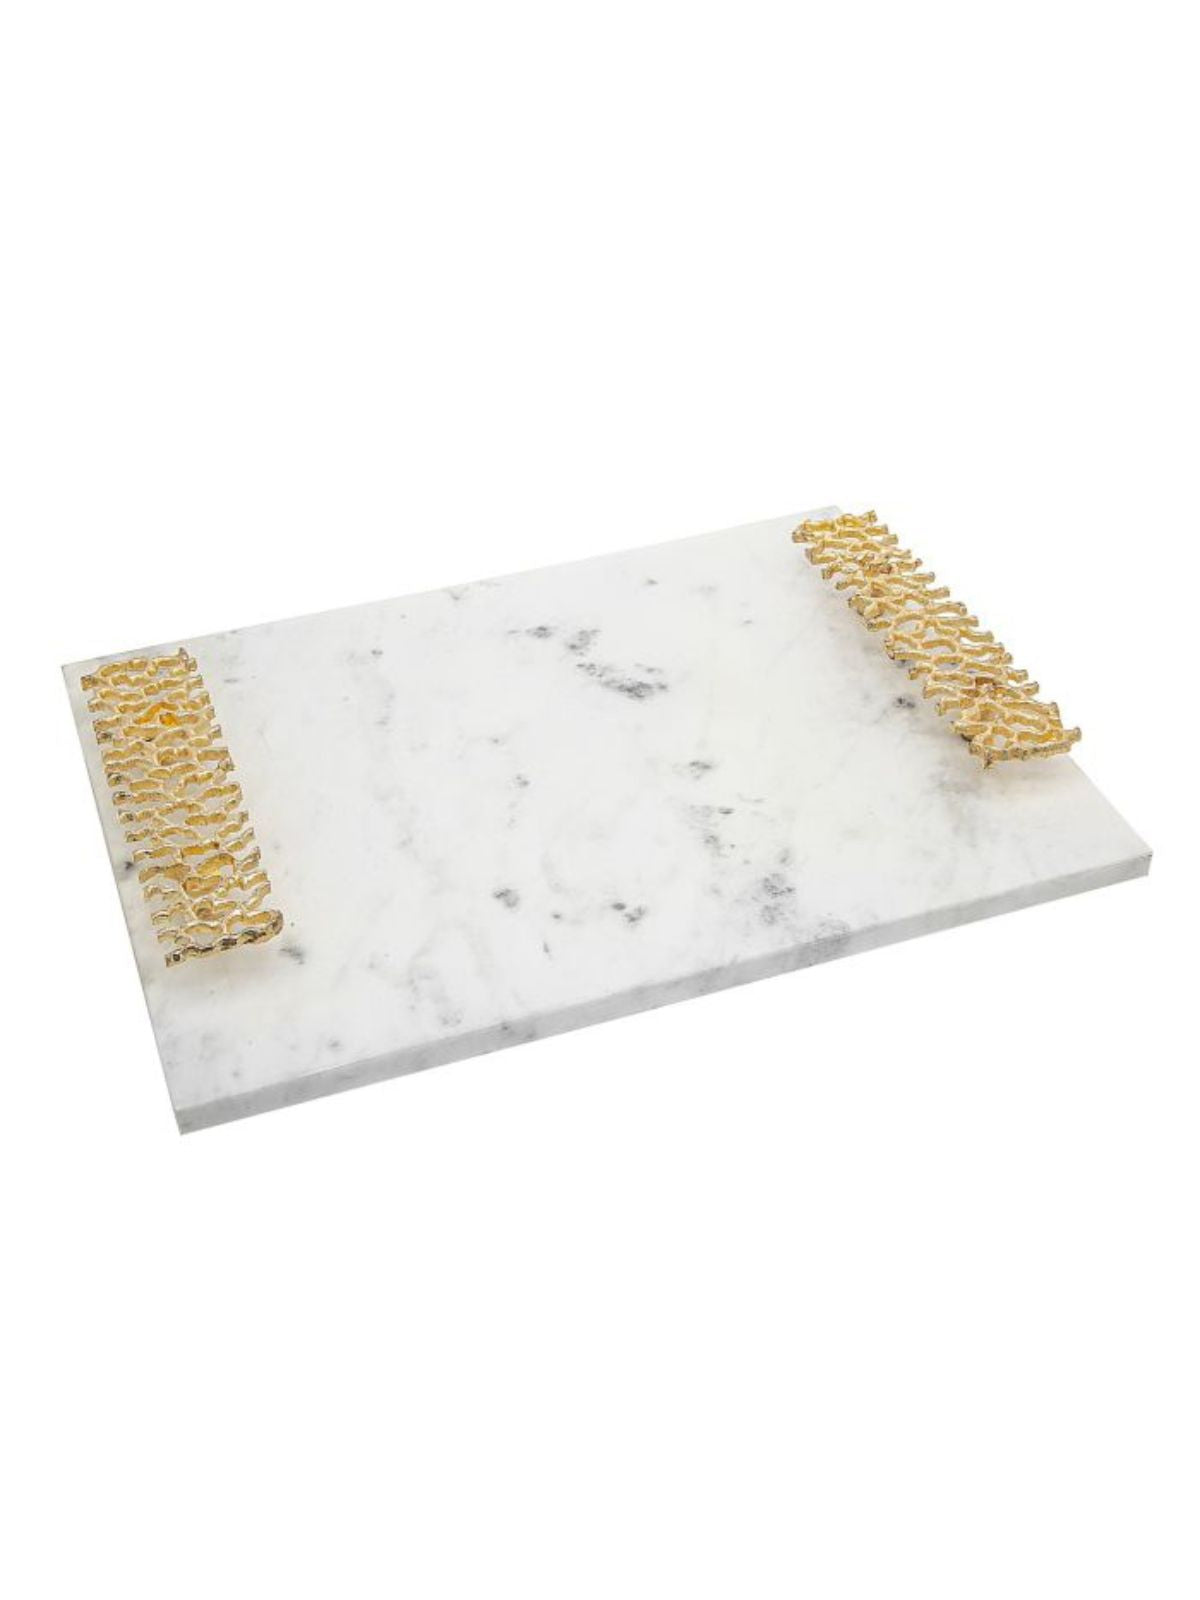 White Marble Decorative Tray with Luxury Gold Pierced Brass Handles, 16L x 12W. 